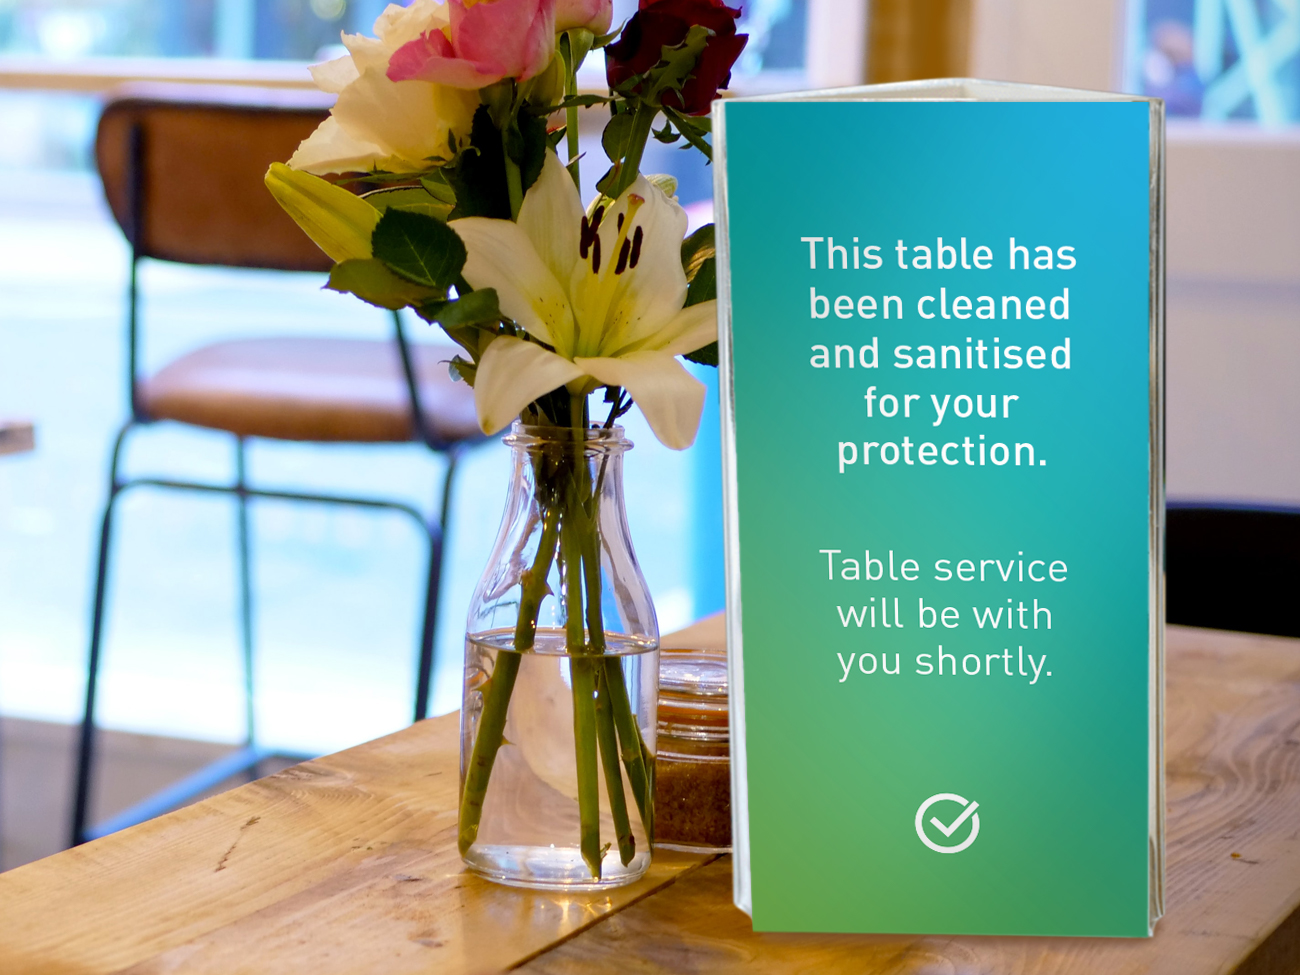 Covid Clean cafe sanitised table signage